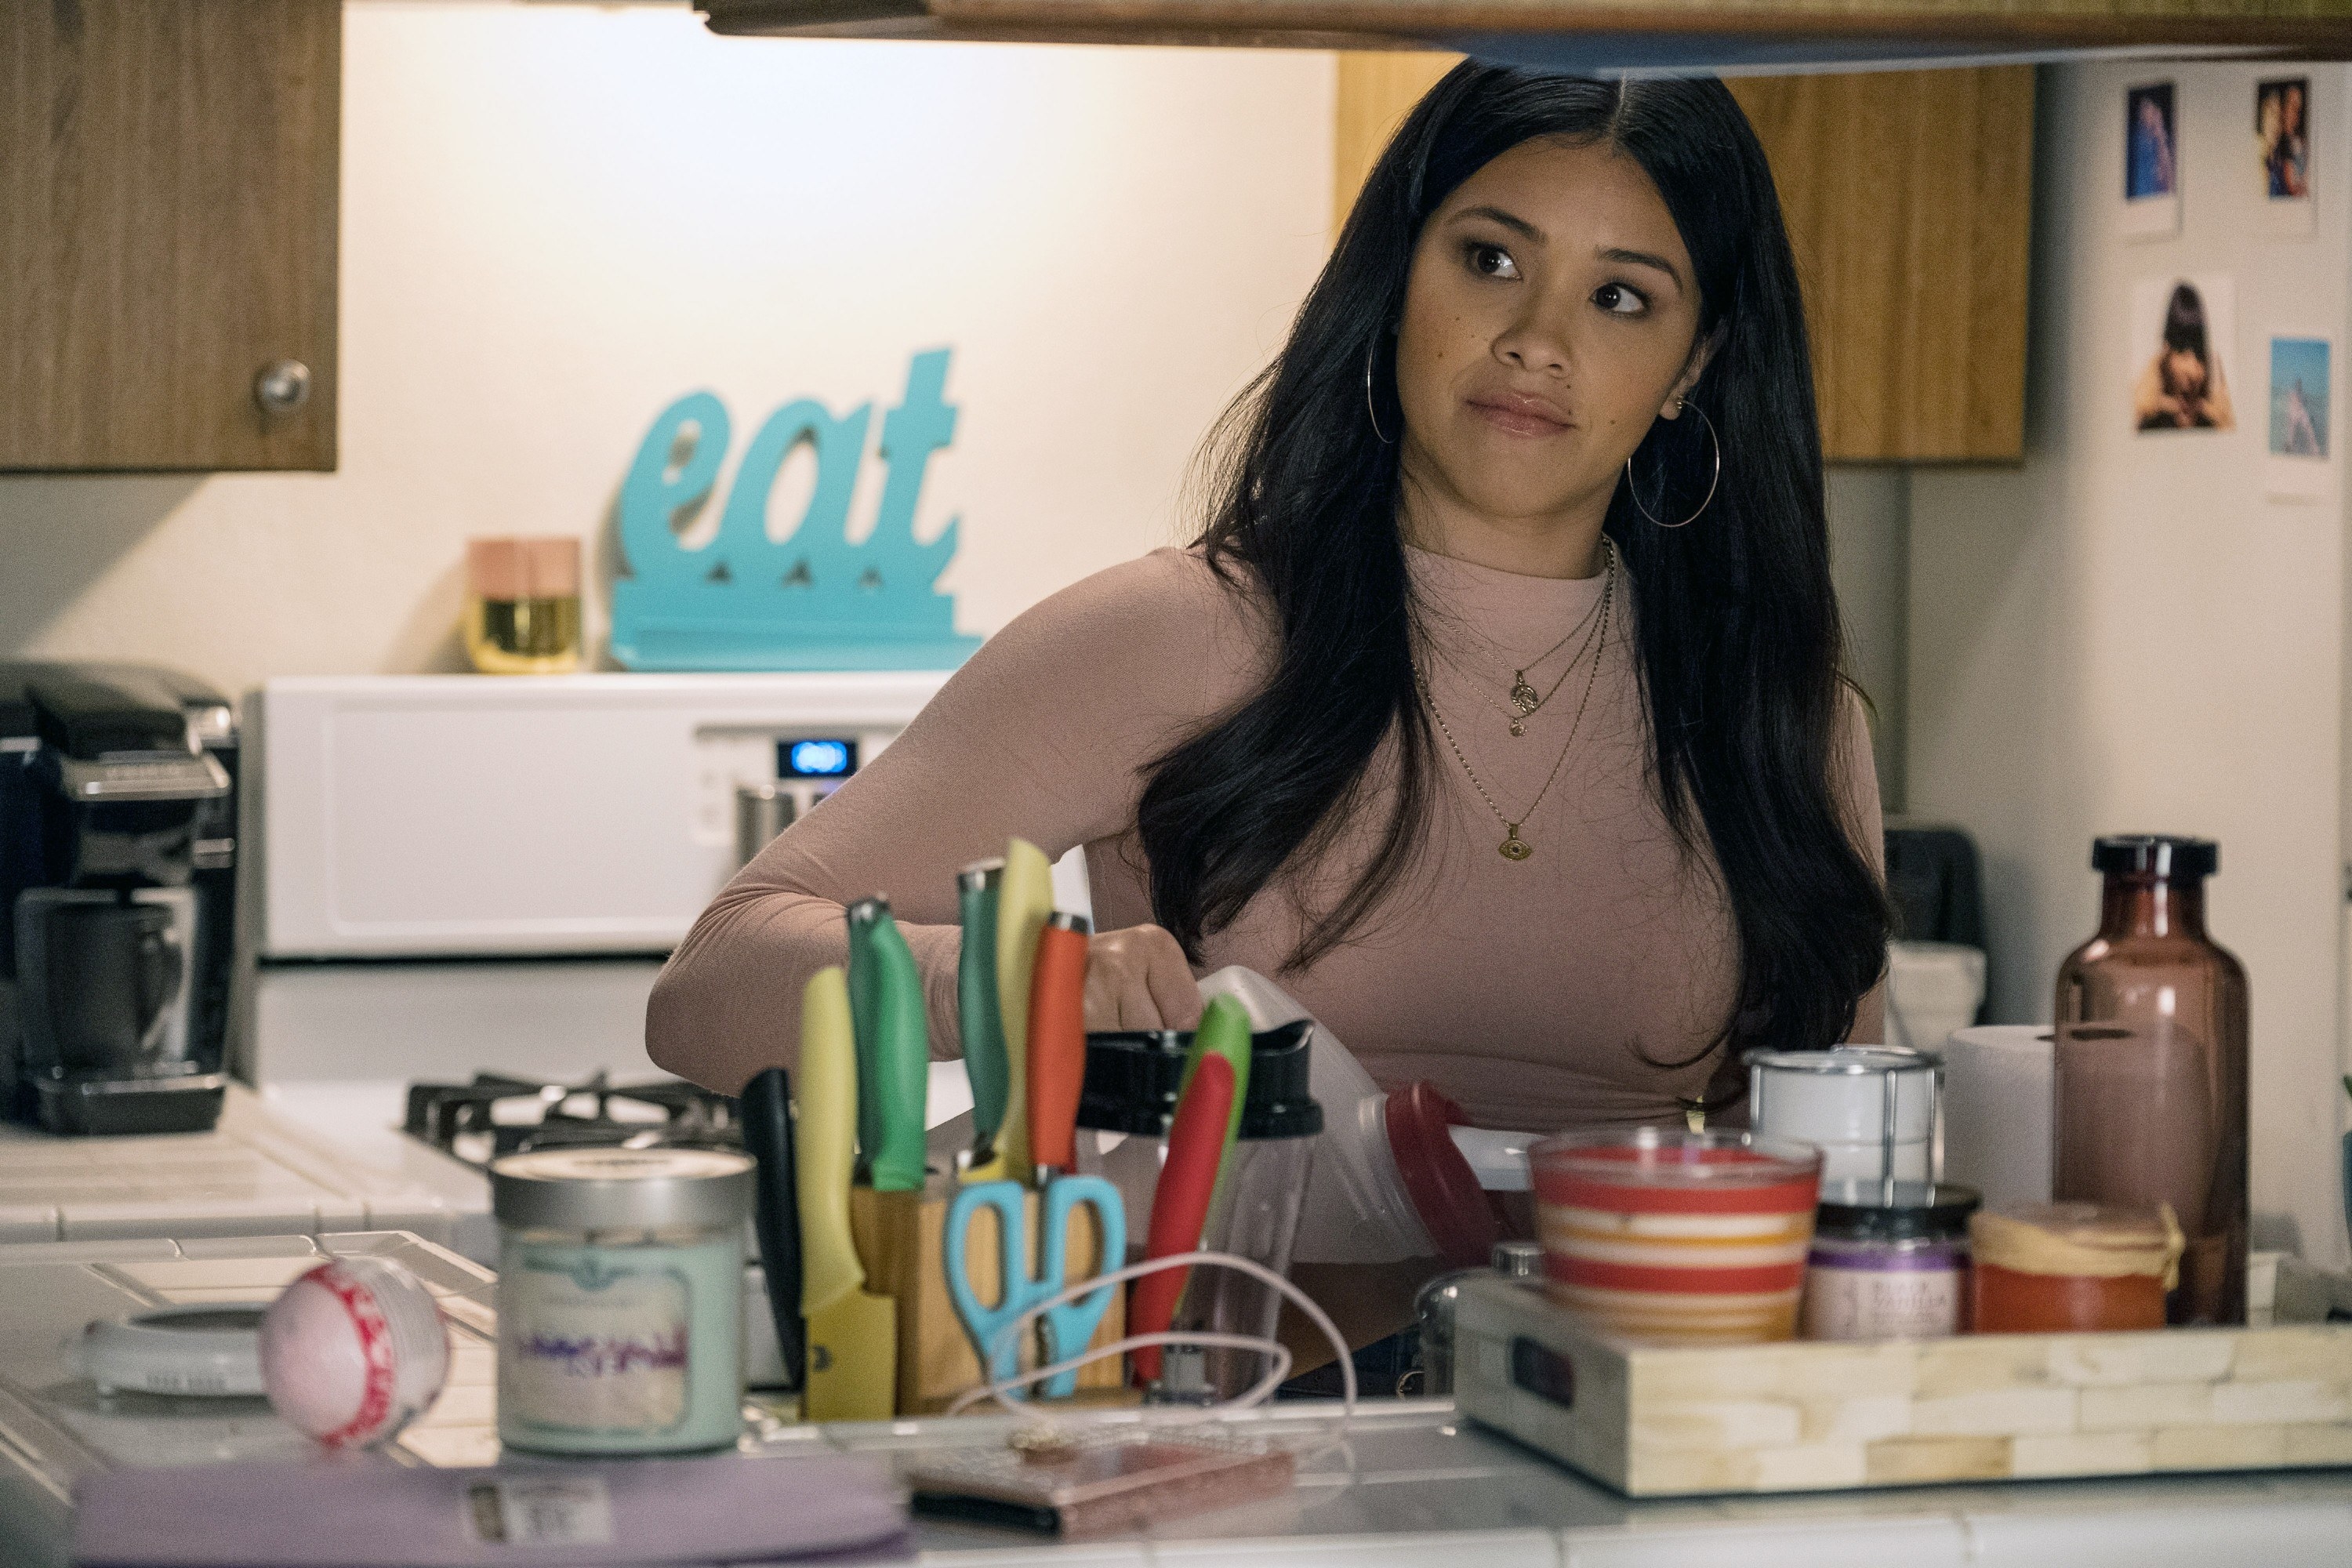 Gina Rodriguez with long hair and a pink top, pouring a drink while looking out through her modest kitchen